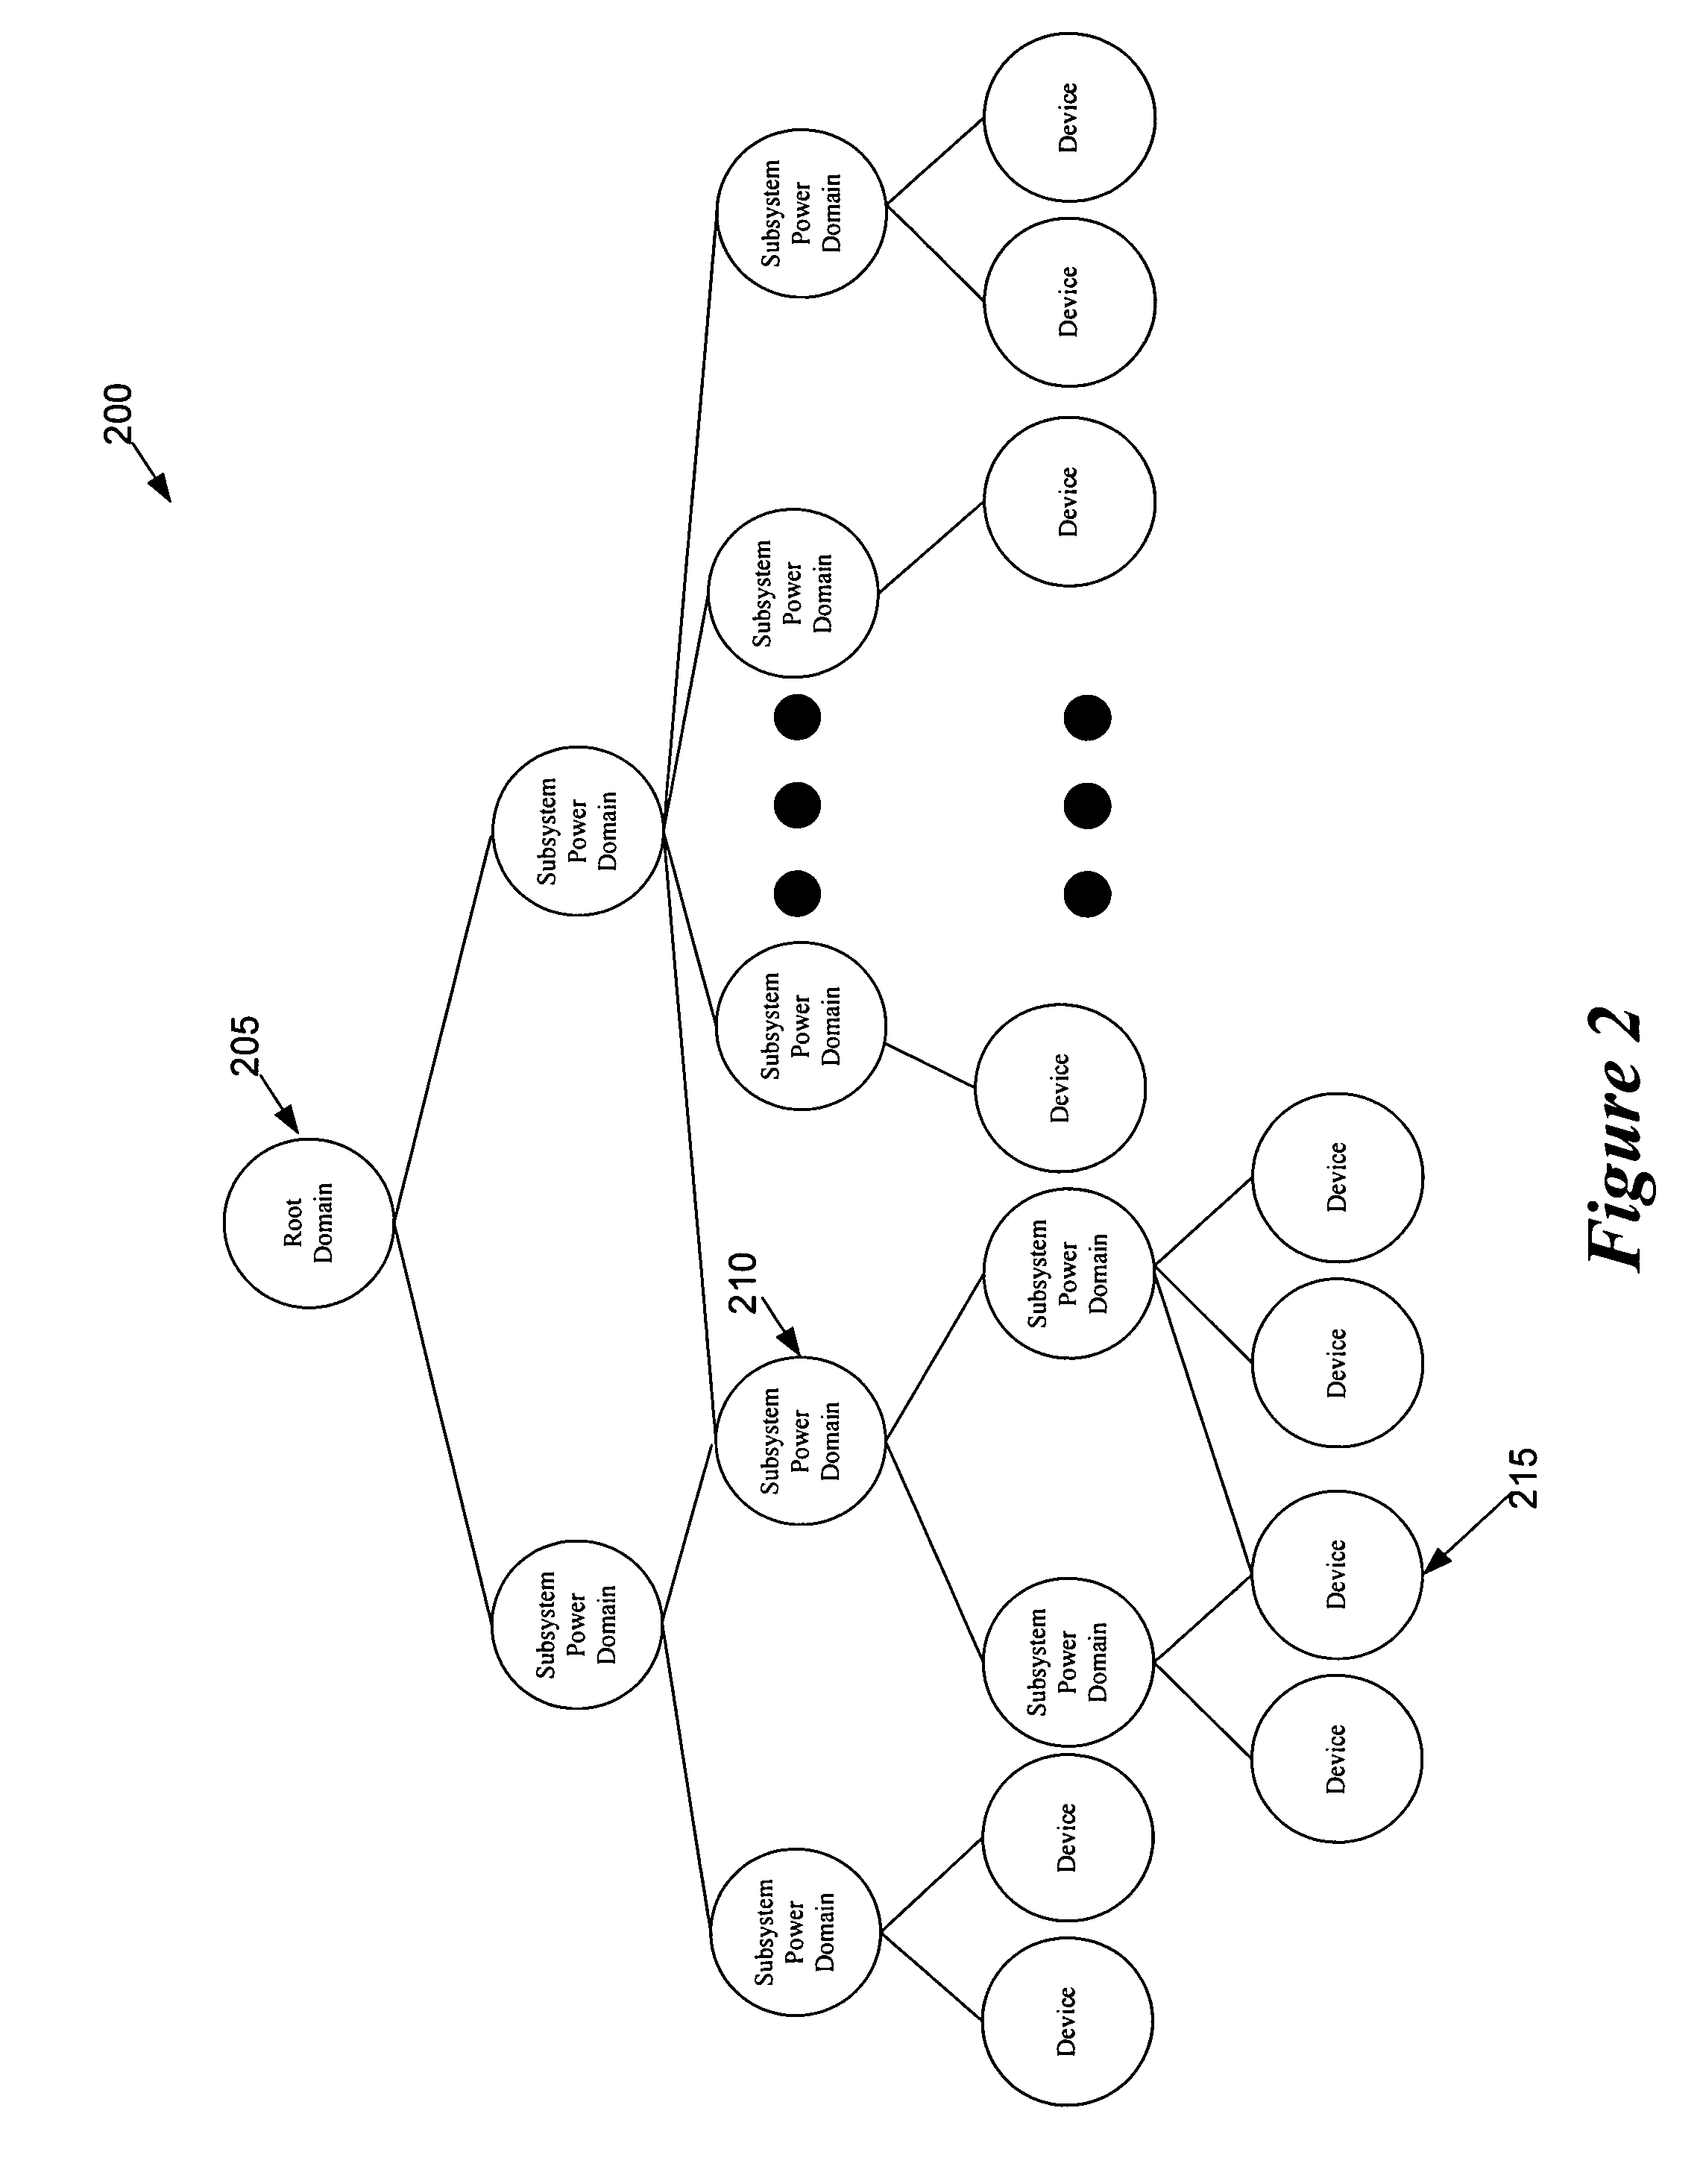 Method and apparatus for managing power in computer systems